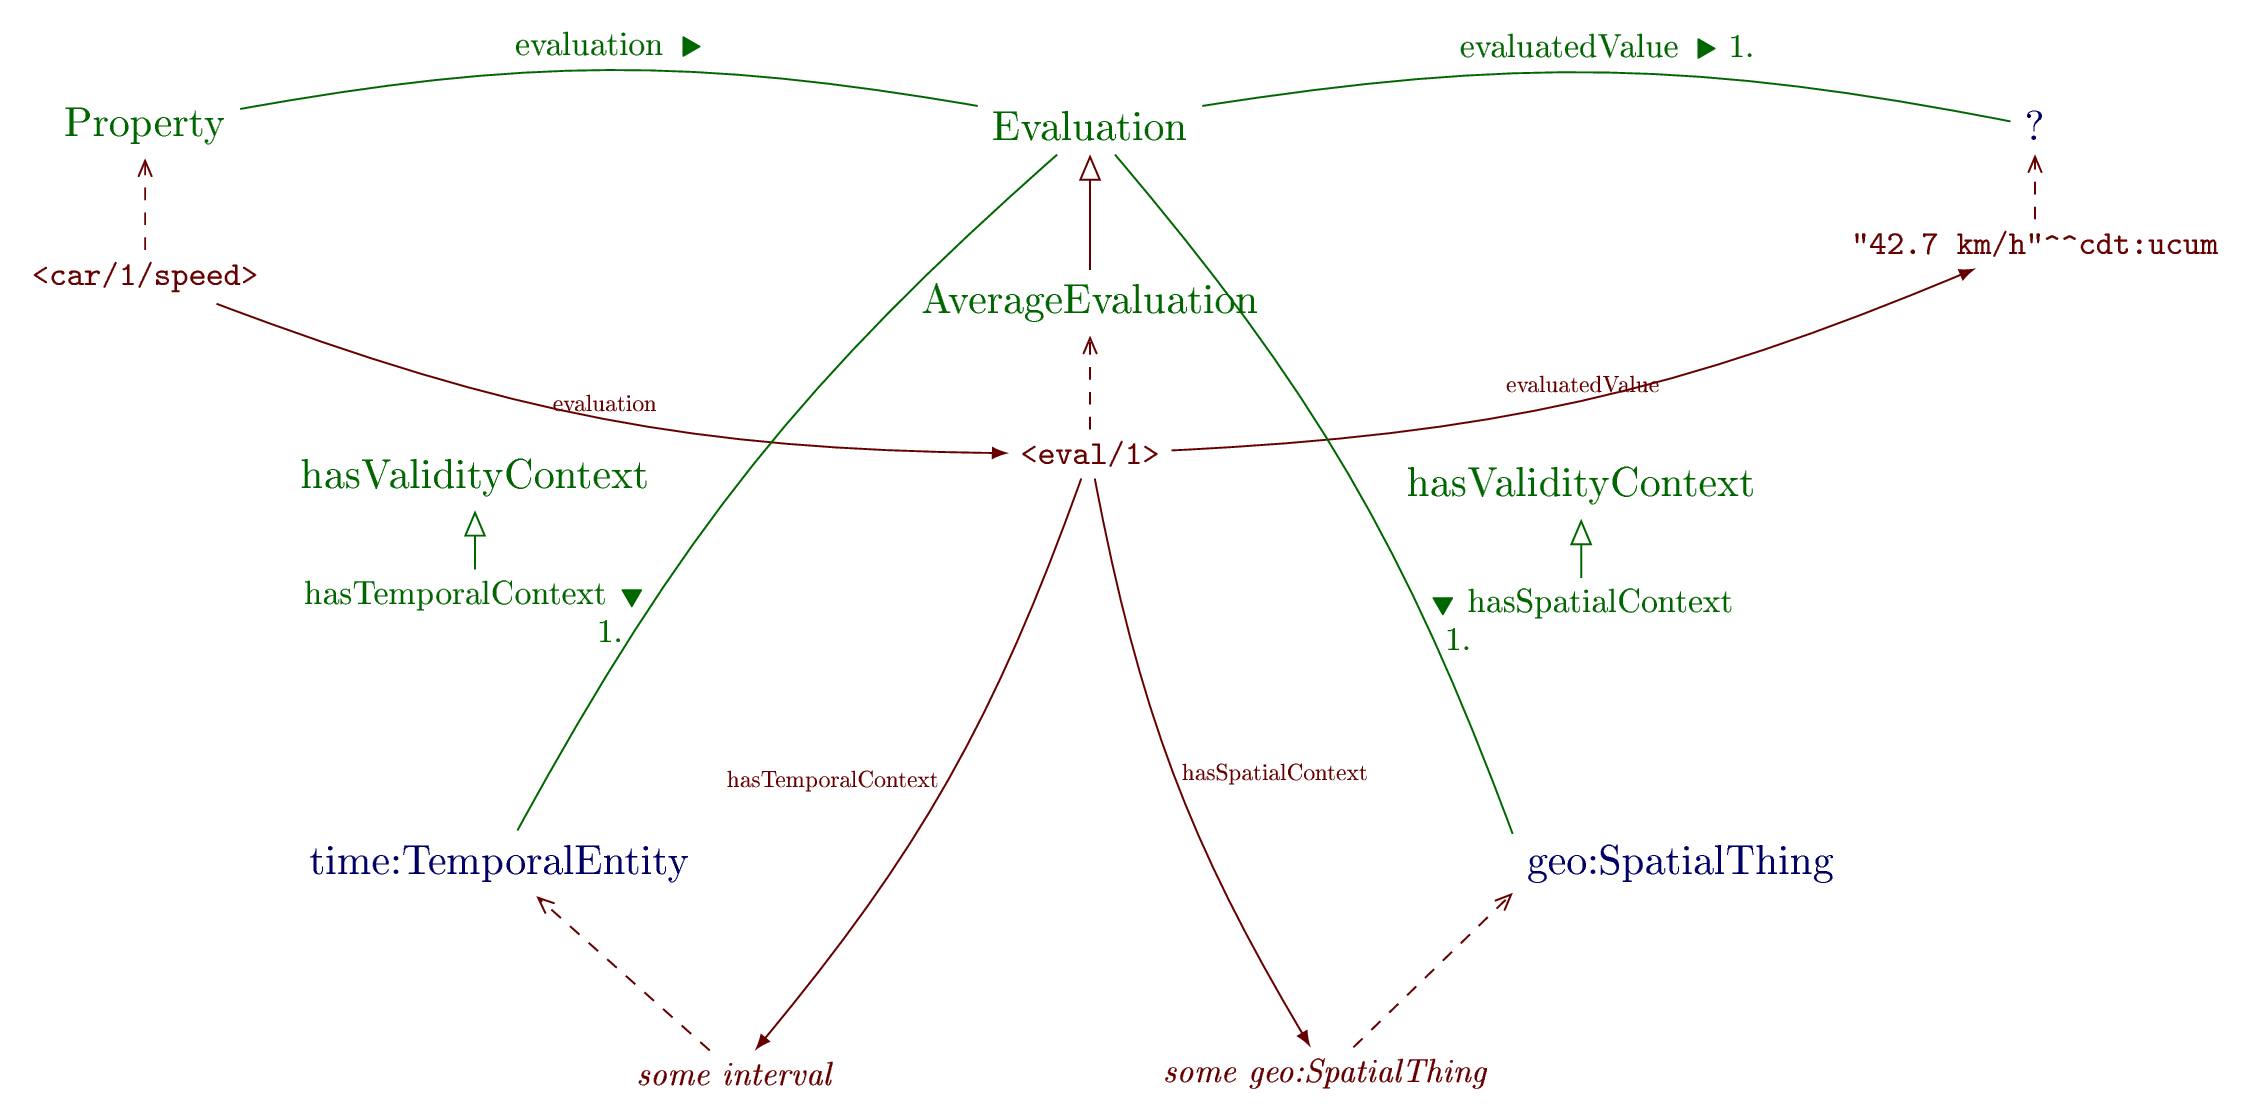 Overview of the Evaluation ontology